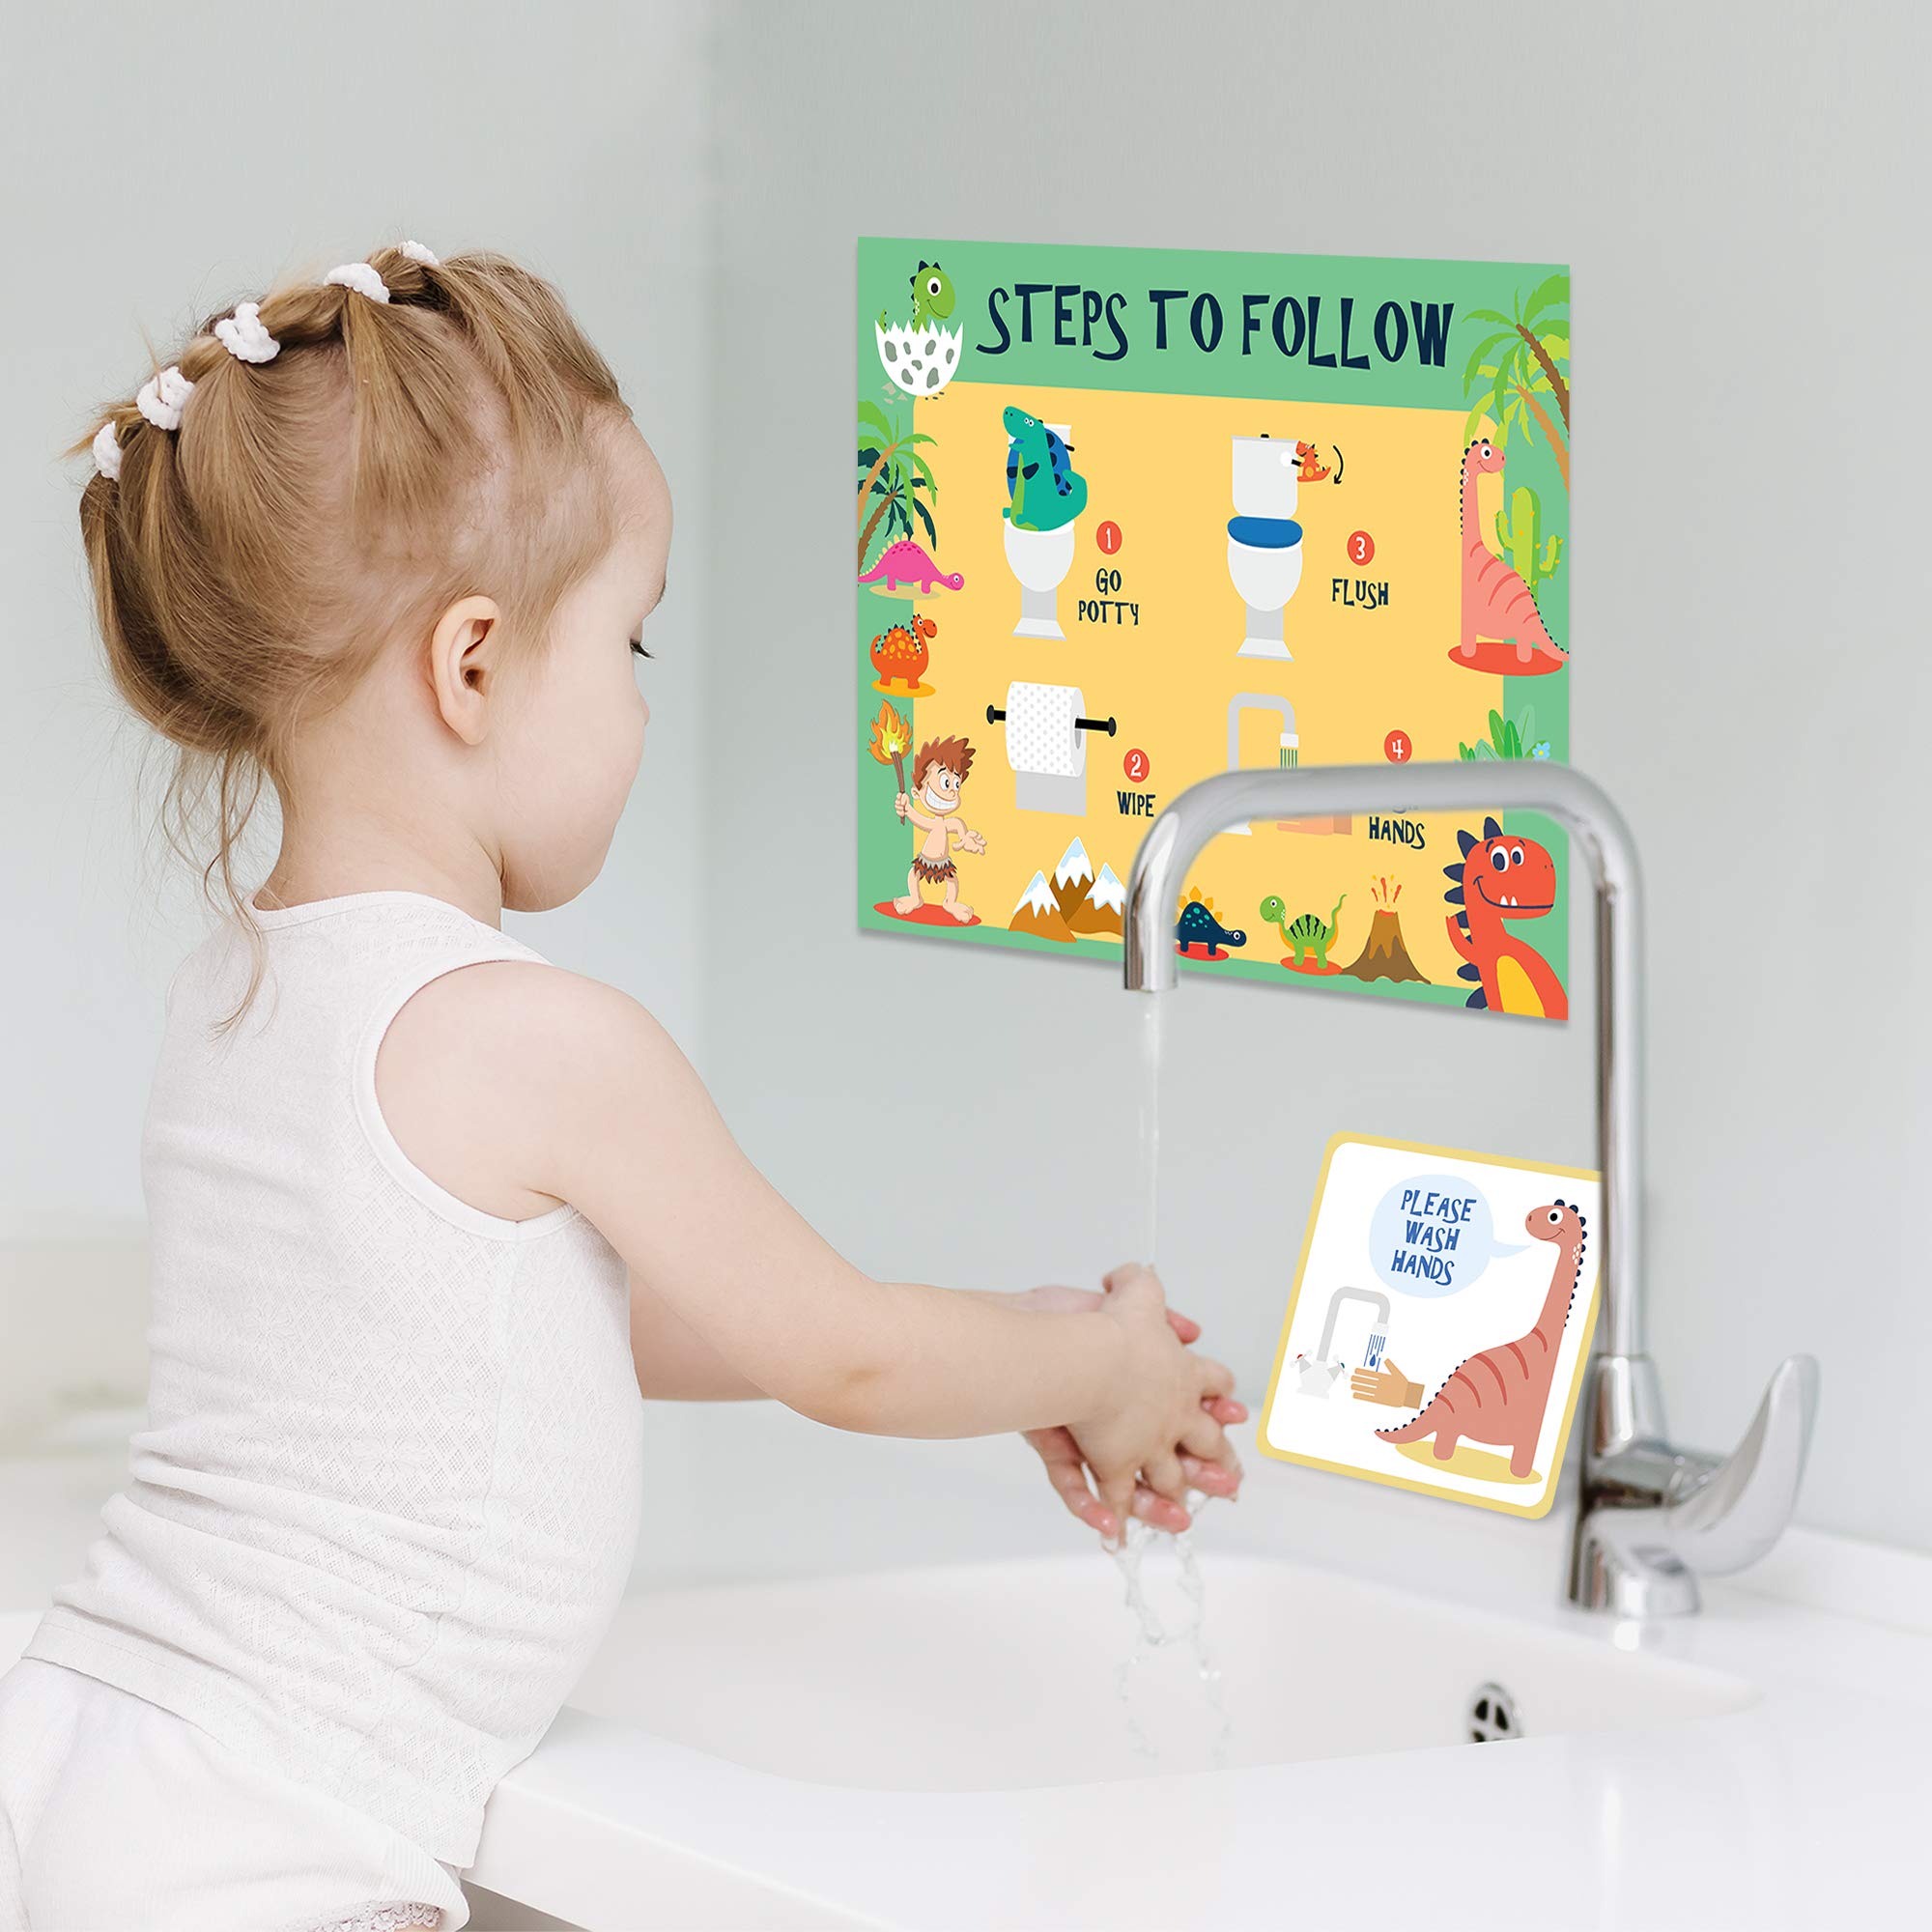 ATHENA FUTURES Potty Training Chart for Toddlers Magnetic Reuseable - Dinosaur Design Waterproof - Chart, 35 Magnetic Stickers, Certificate, Instruction Booklet, Crowns and More - for Boys and Girls